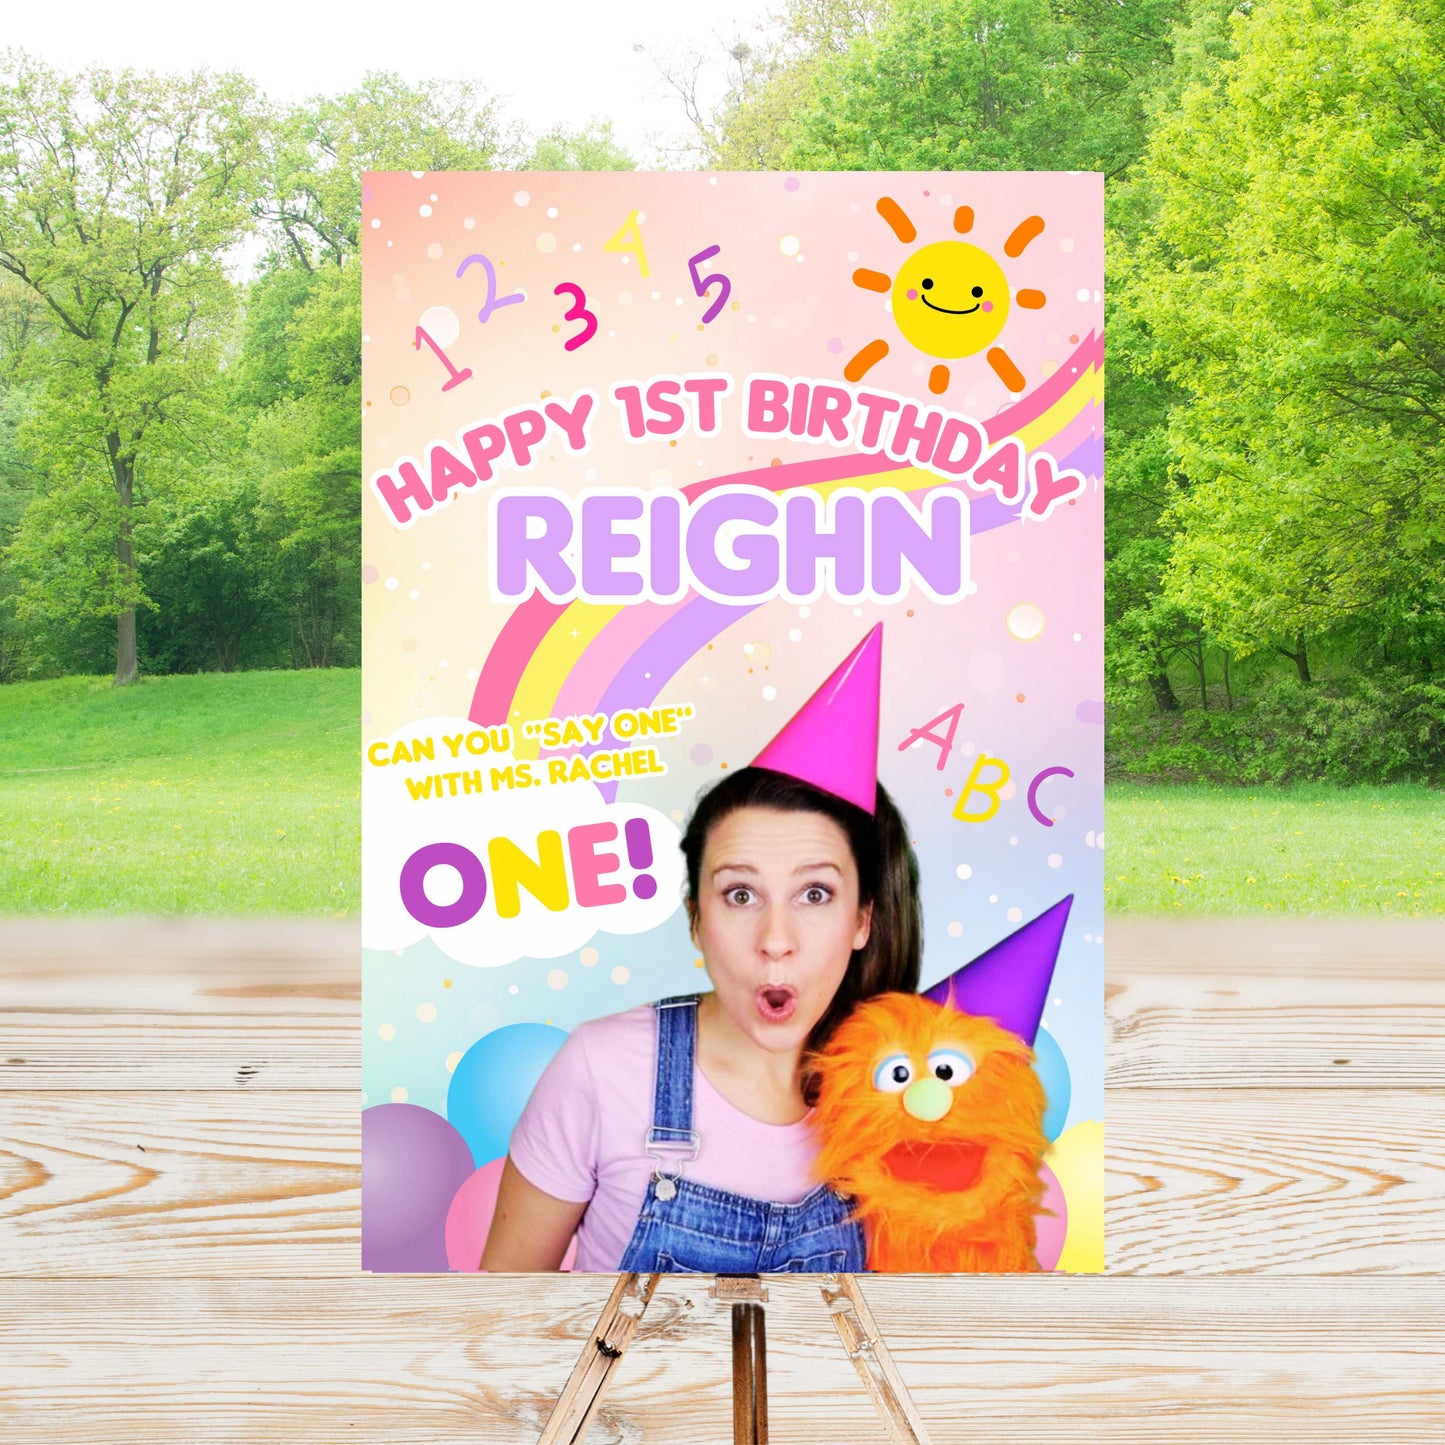 Ms. Rachel Party Sign | Editable Text with Canva | Digital Poster | Edit | Save | Download | Print